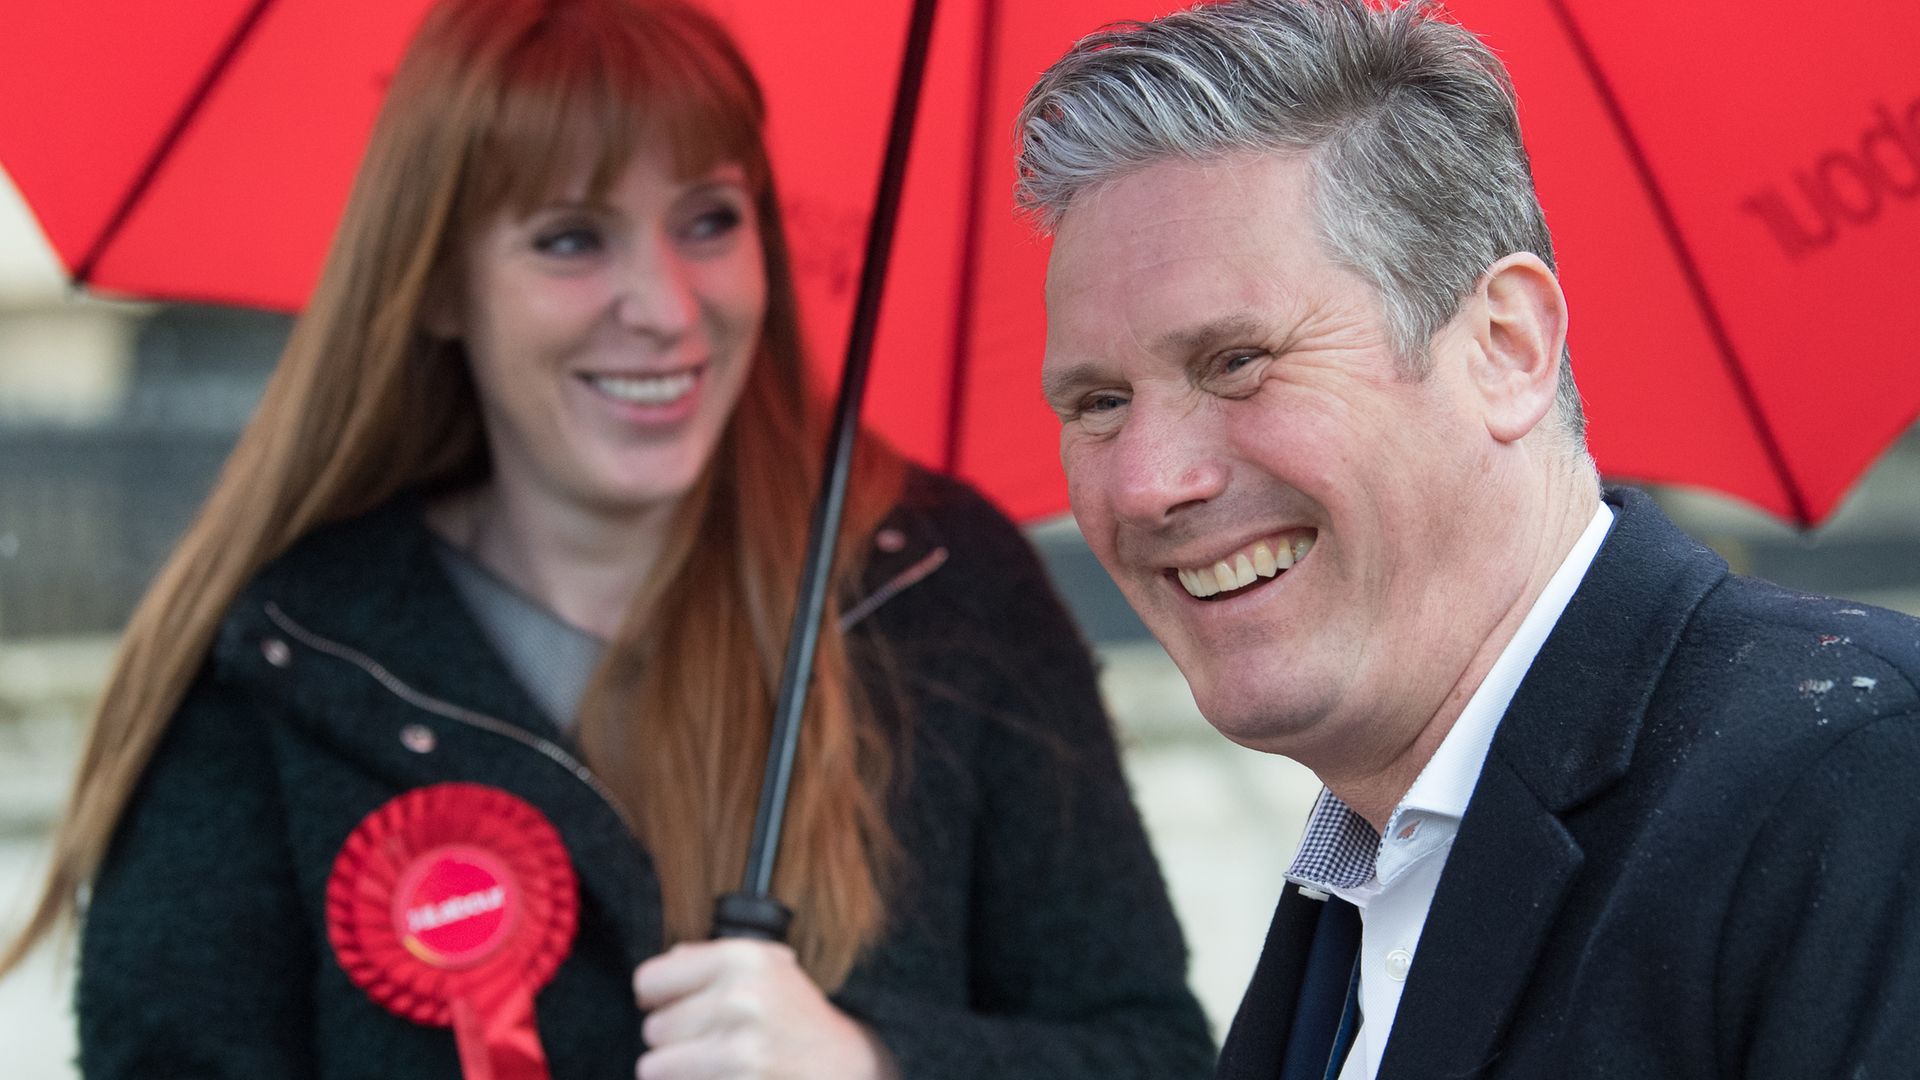 Leader of the Labour Party Sir Keir Starmer and Labour Deputy Leader, Angela Rayner (far right) during a visit to Birmingham - Credit: PA